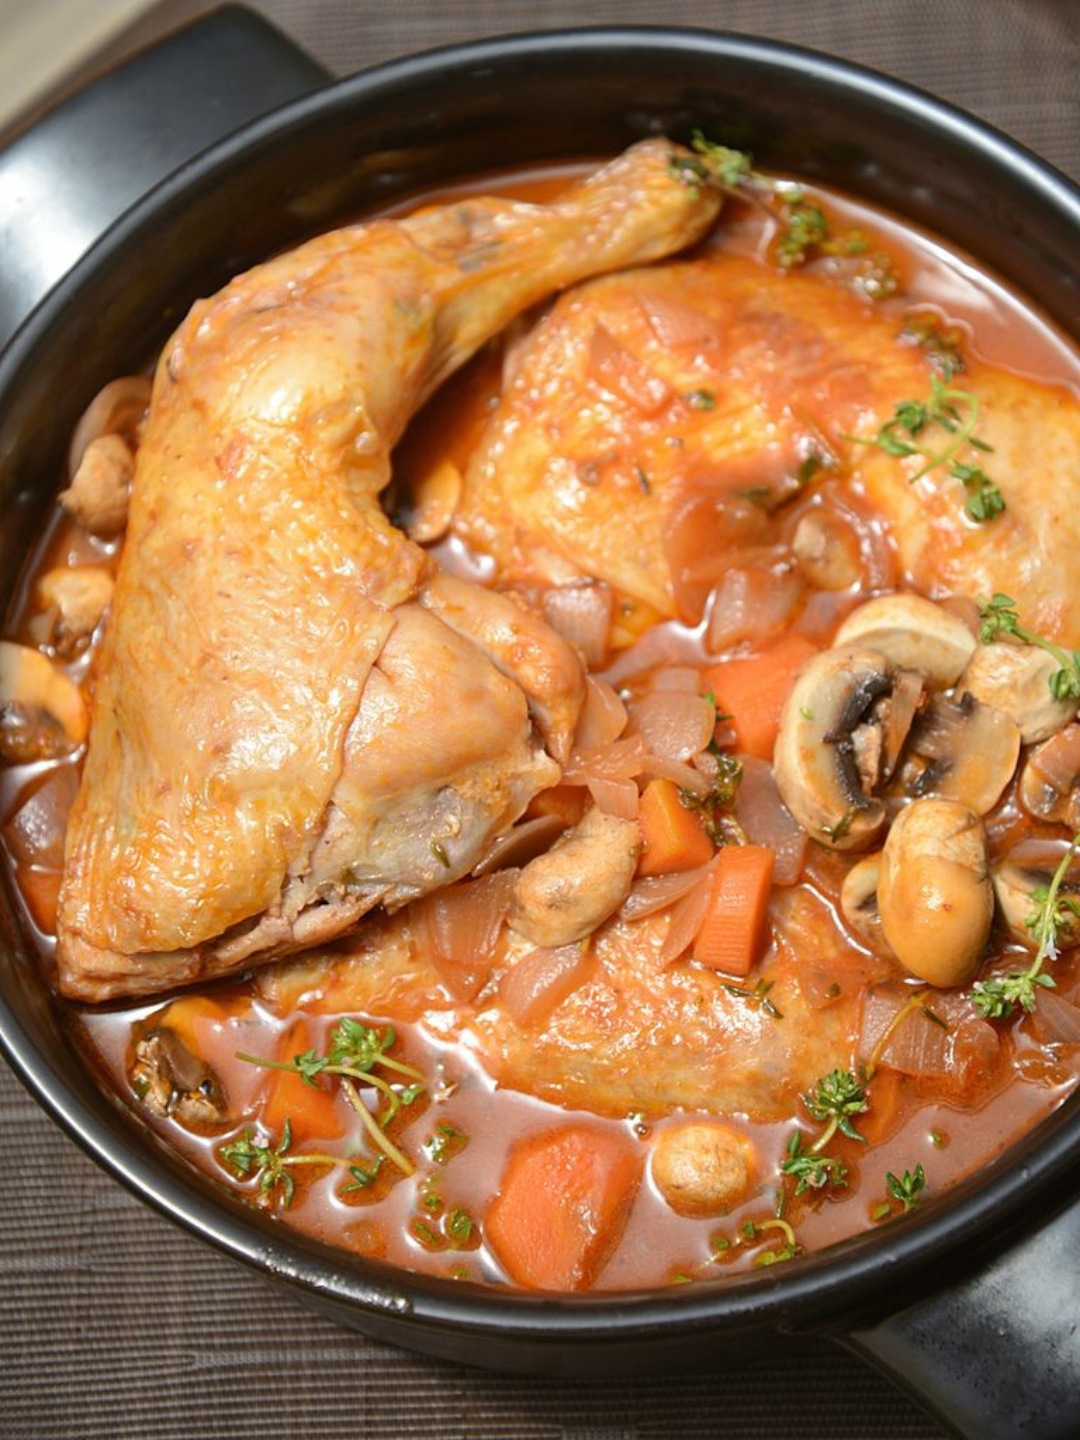 Coq Au Vin, Or Chicken In Wine, Is A Popular Classic French Chicken